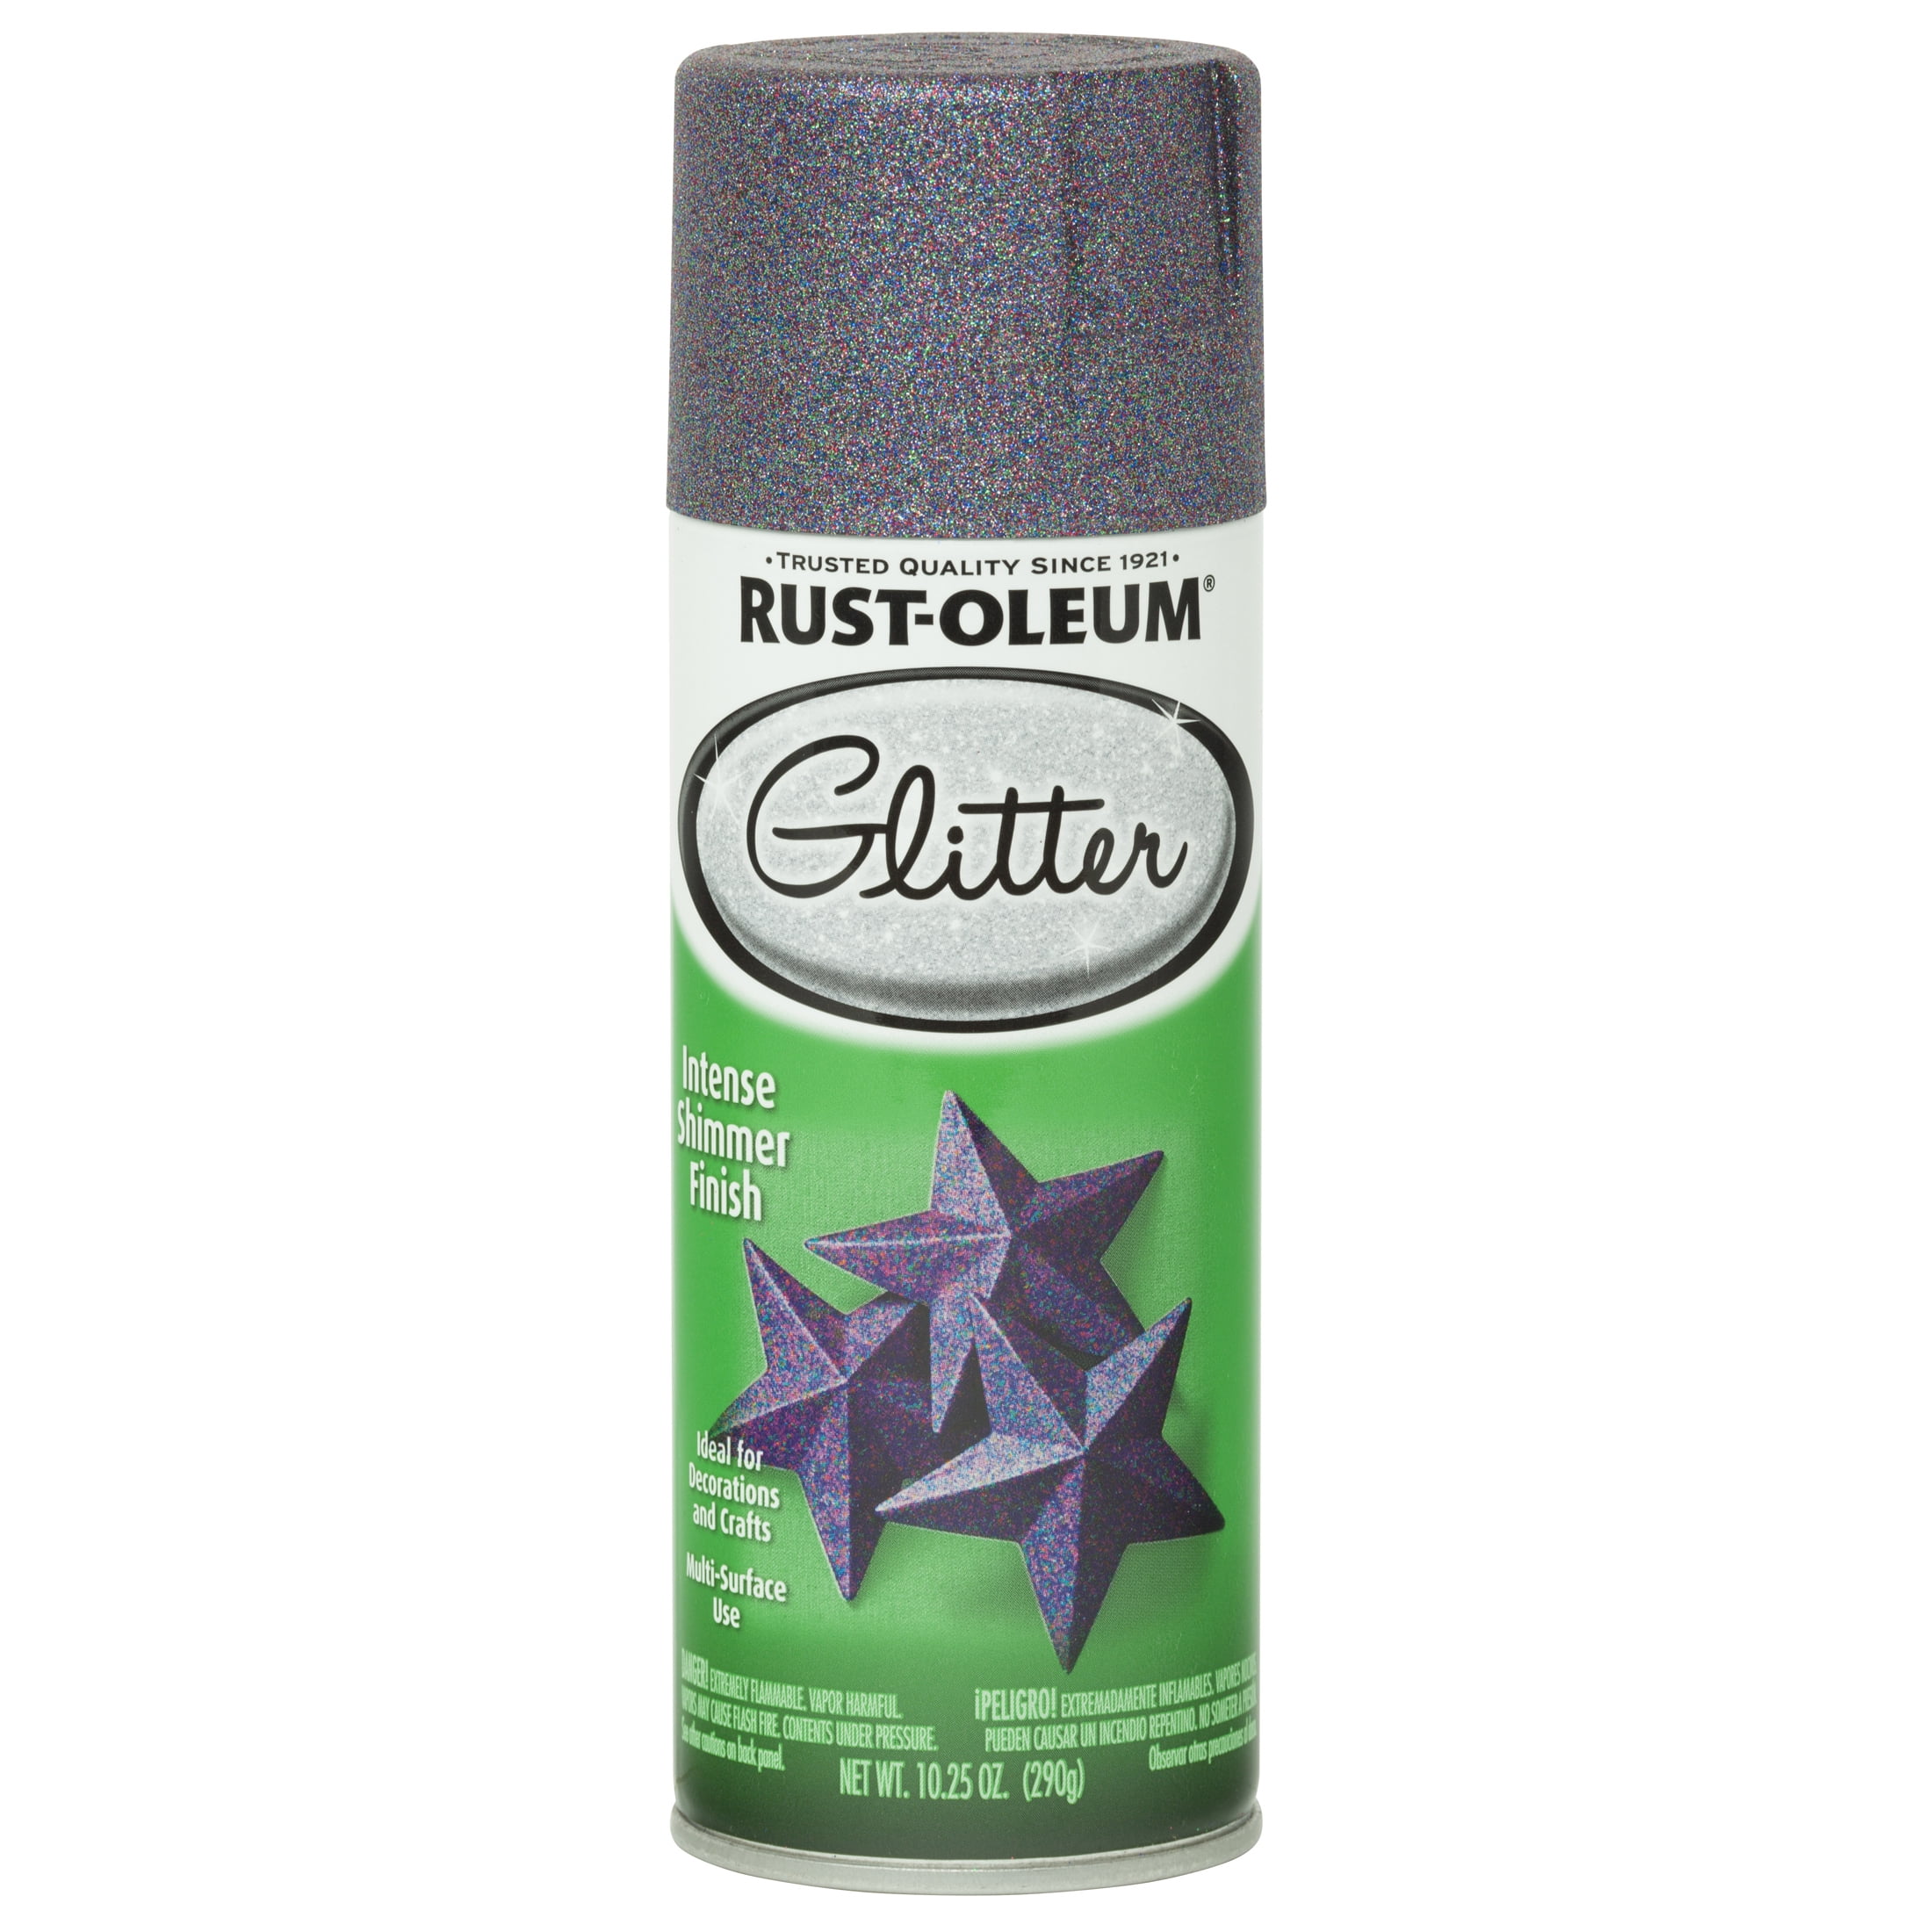 Rust-Oleum Specialty Glitter Silver Spray Paint 10.25 oz., Count of: 1 -  Fred Meyer